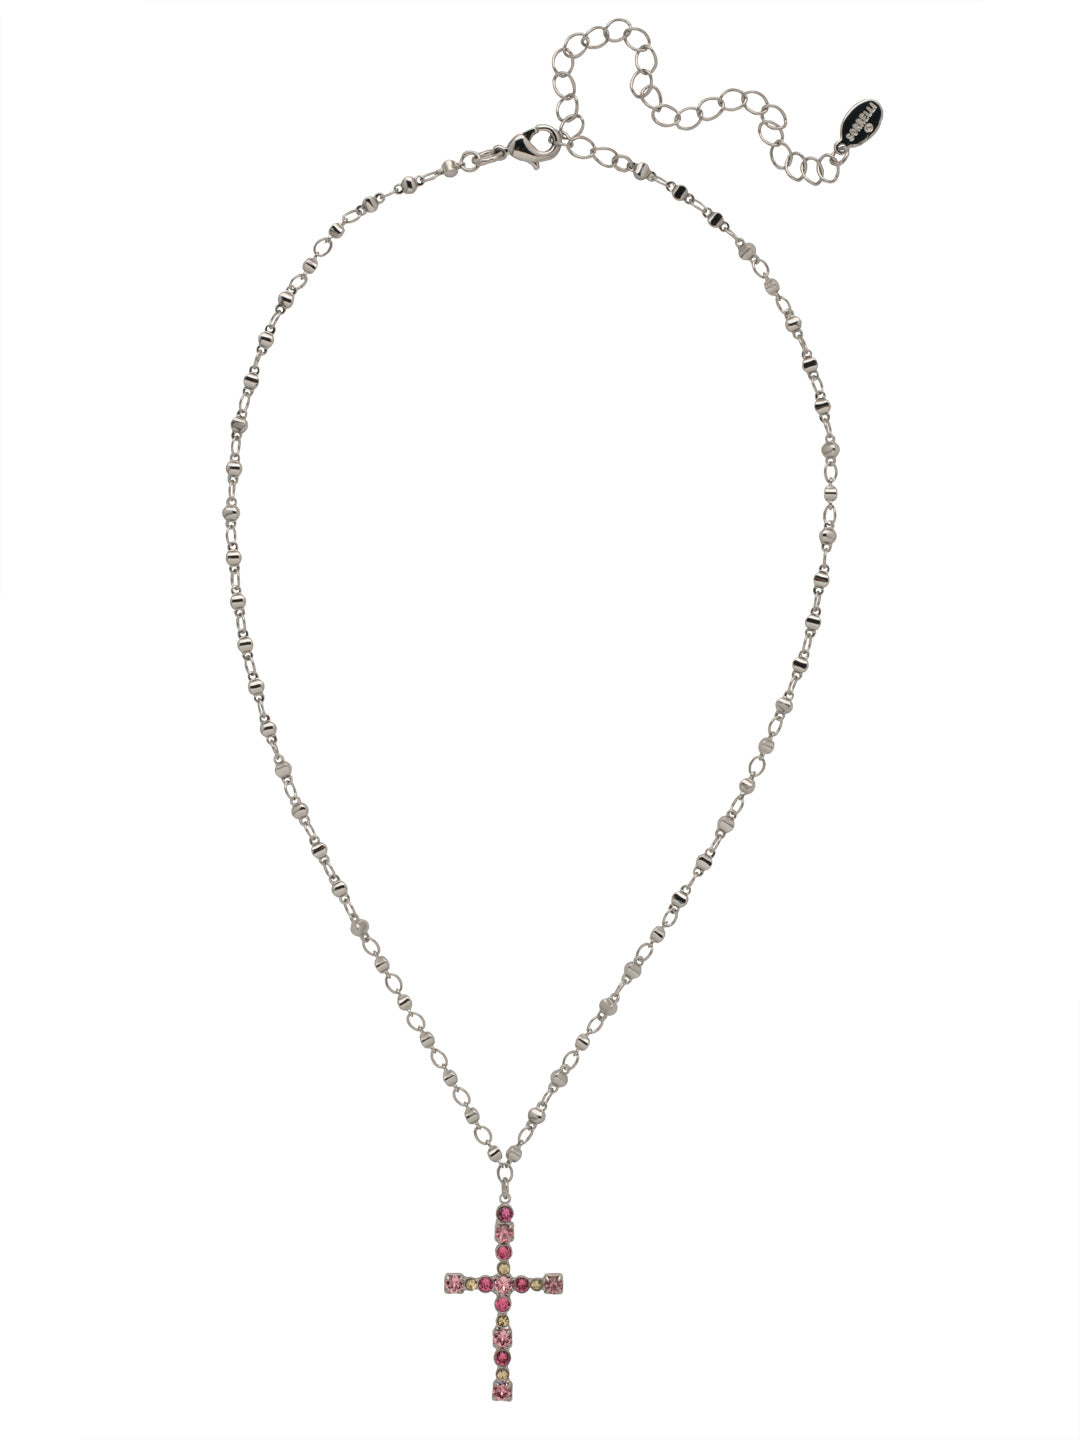 Charmaine Cross Pendant Necklace - NEX2PDPPN - <p>Perfect for any occasion, the Charmaine Cross Pendant Necklace spotlights a crystal studded cross on an adjustable chain. From Sorrelli's Pink Pineapple collection in our Palladium finish.</p>